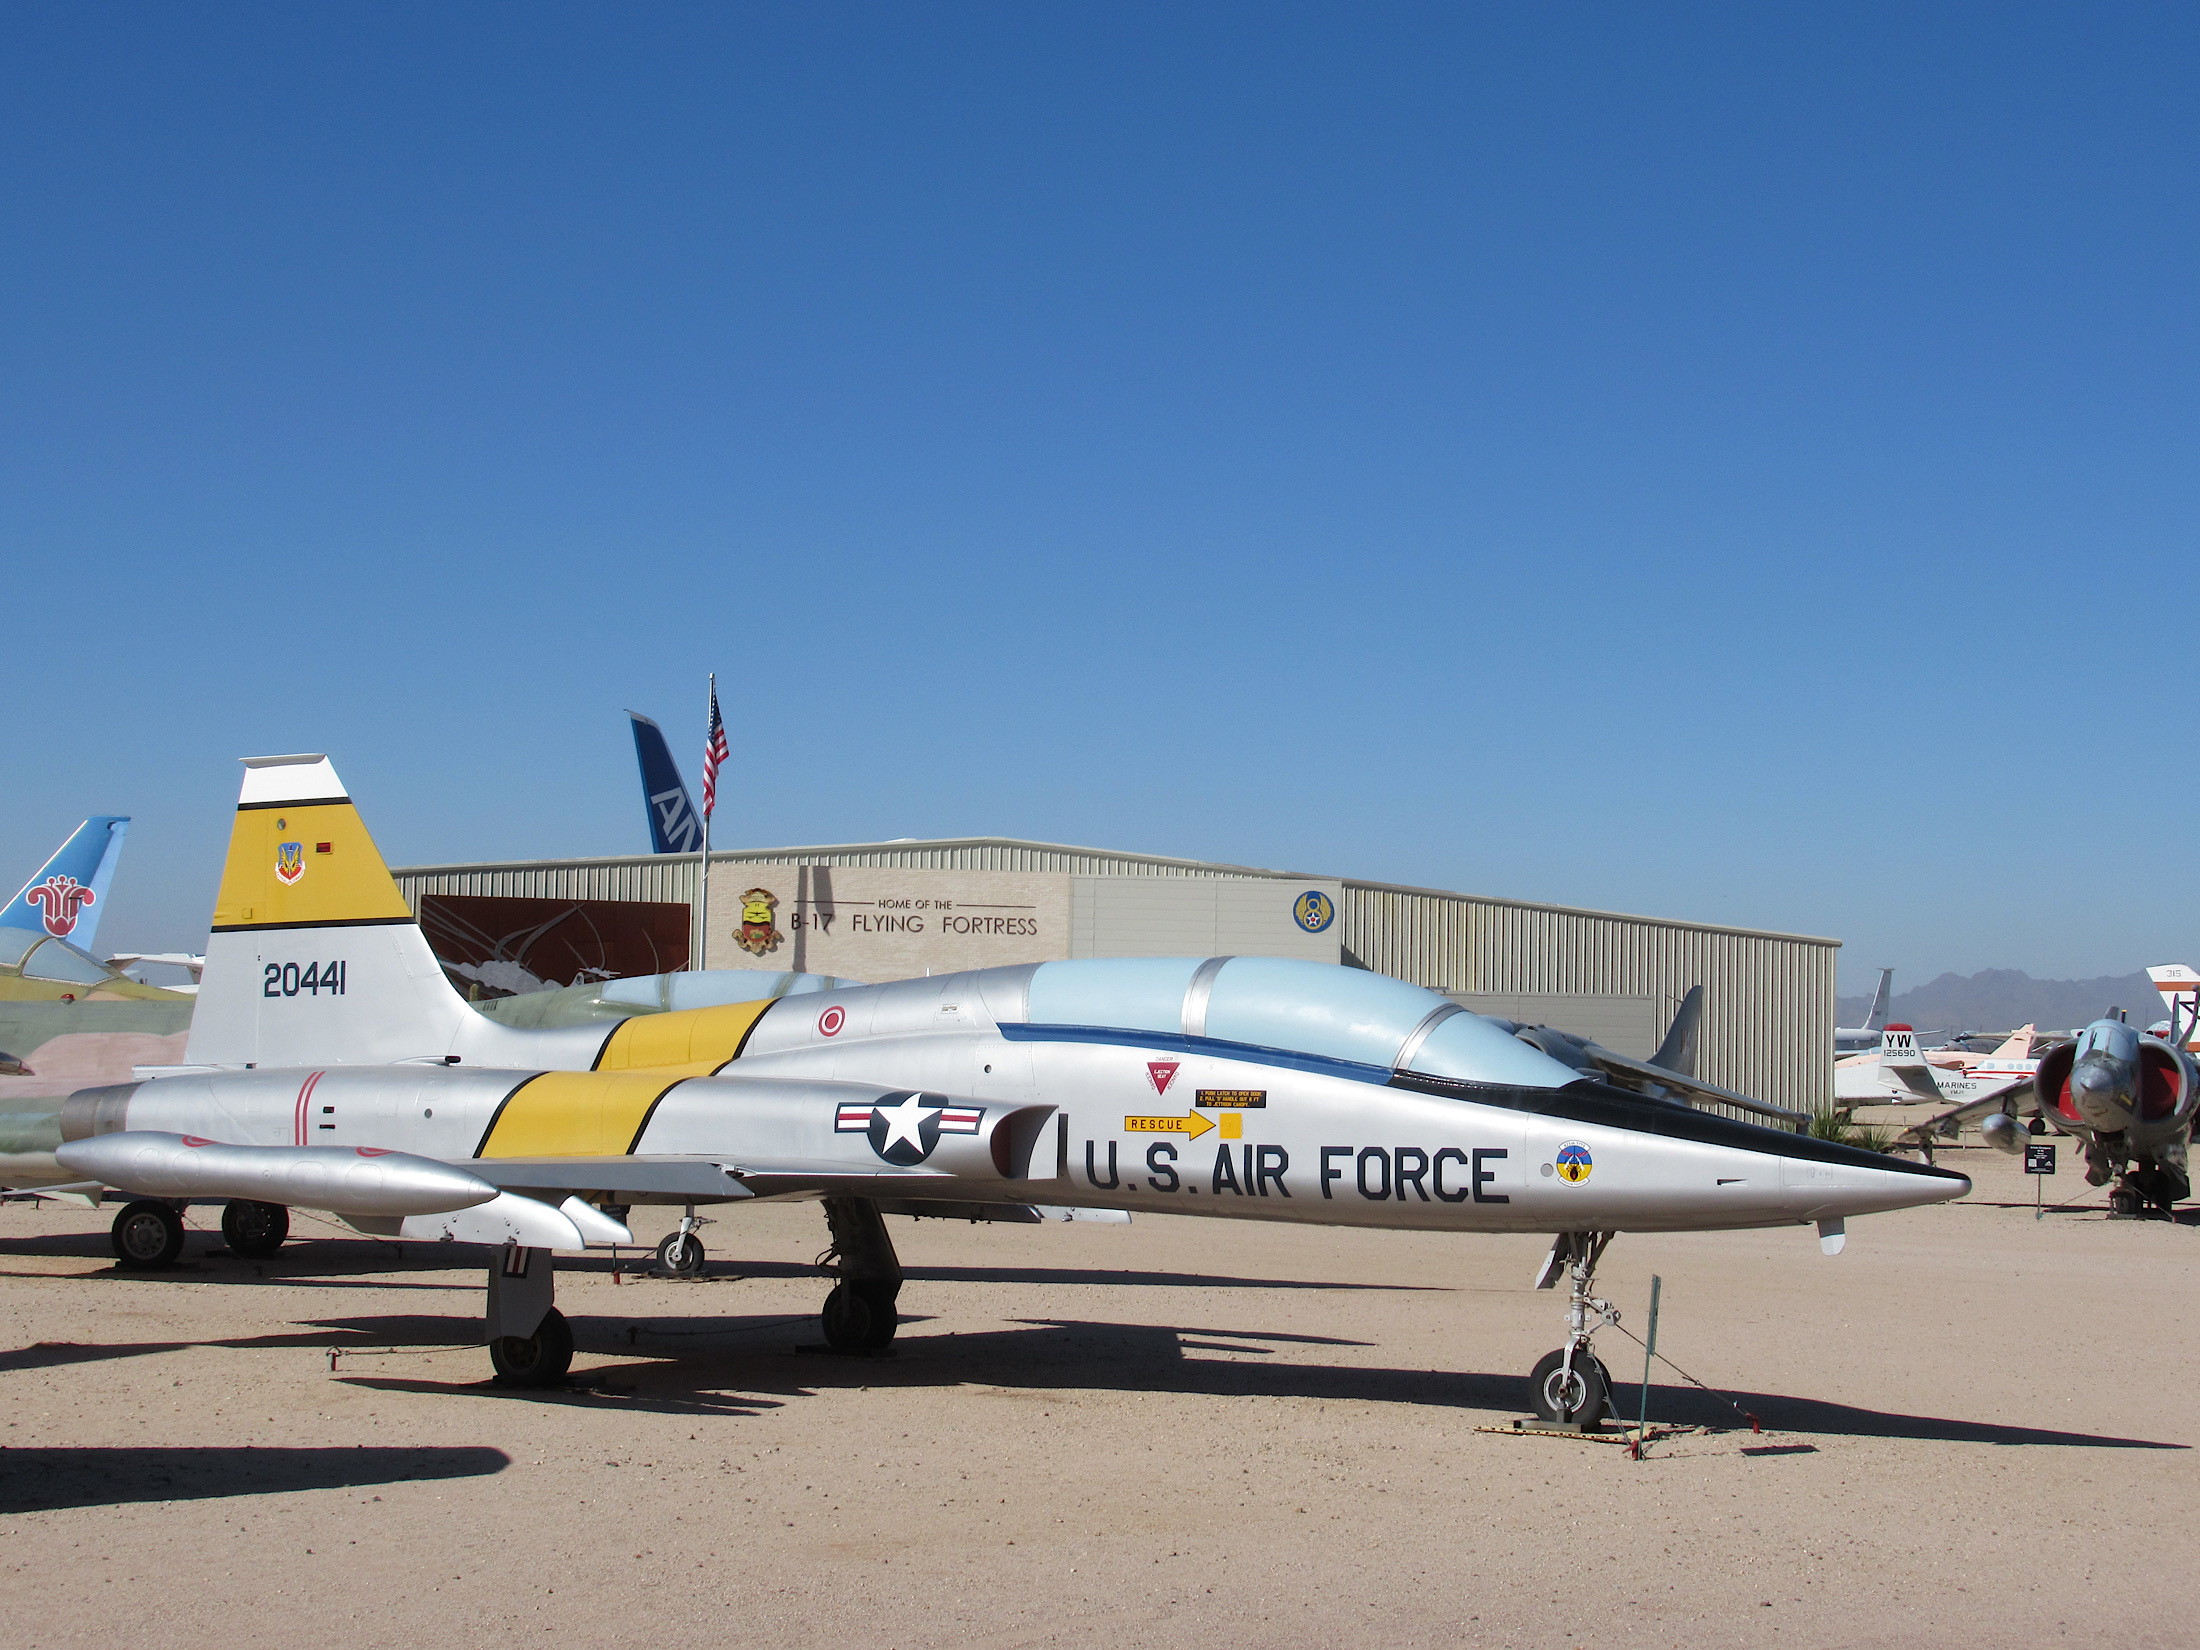 U.S. Air Force fighter plane with yellow and black paint on gravel in front of large hangar.